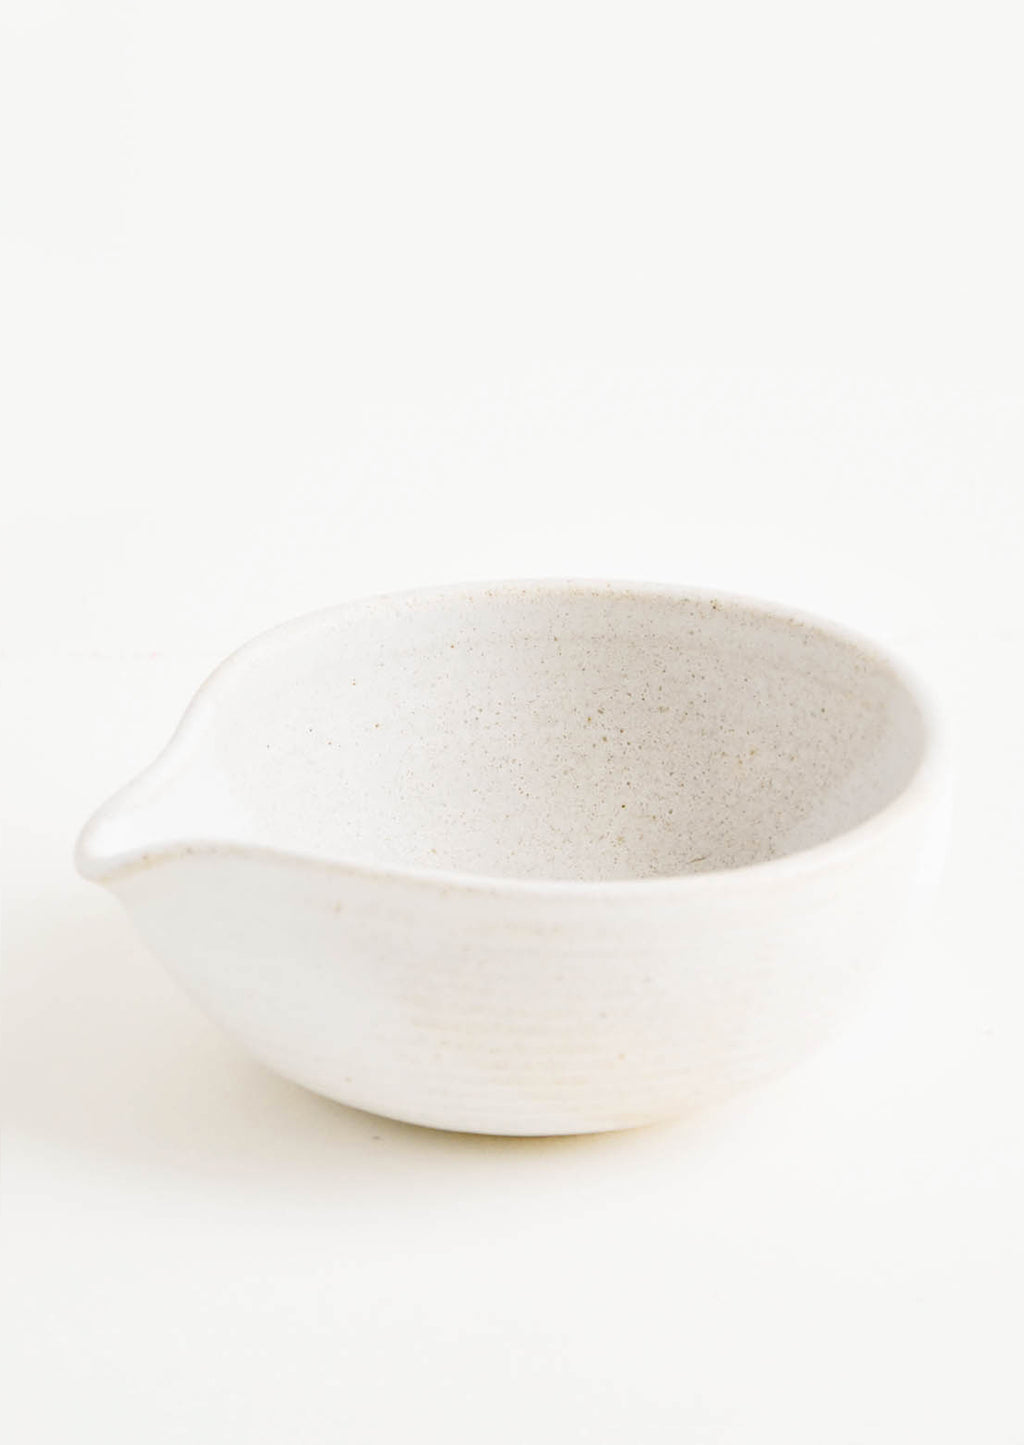 Warm White: An ivory spouted ceramic bowl.